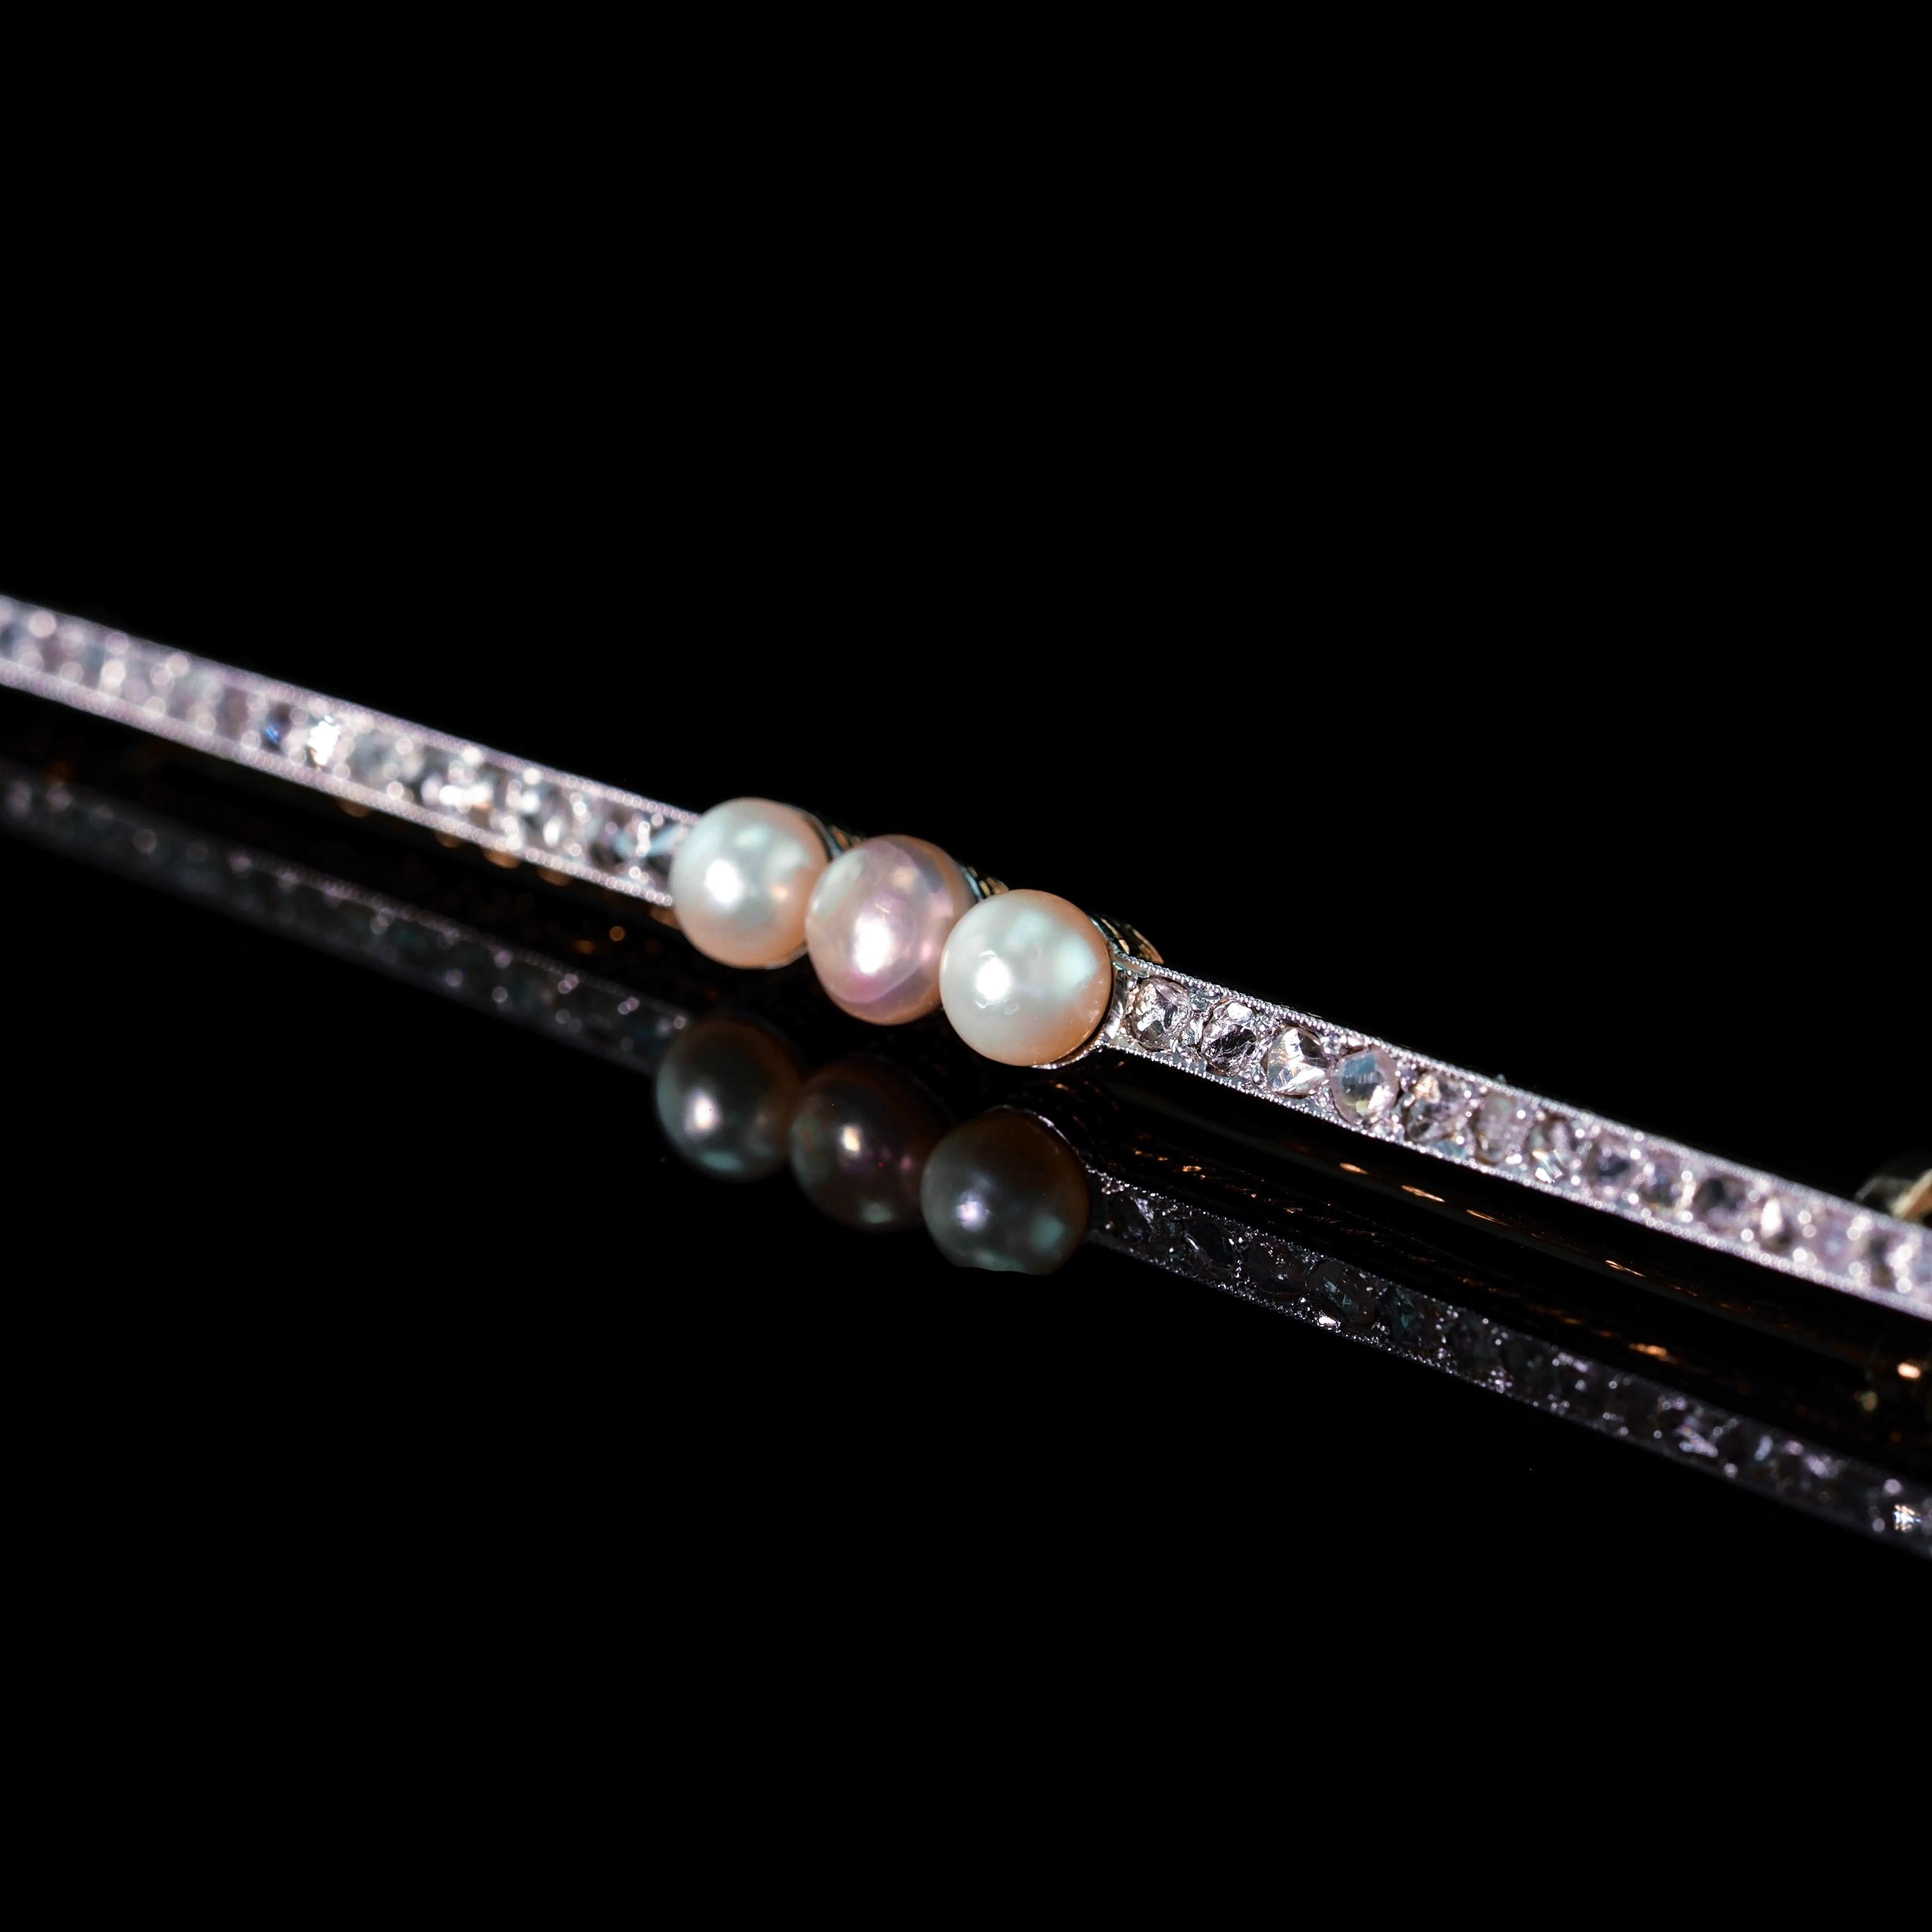 Antique 18ct Gold & Platinum Pink Pearl & Diamond Brooch - c.1920 For Sale 5